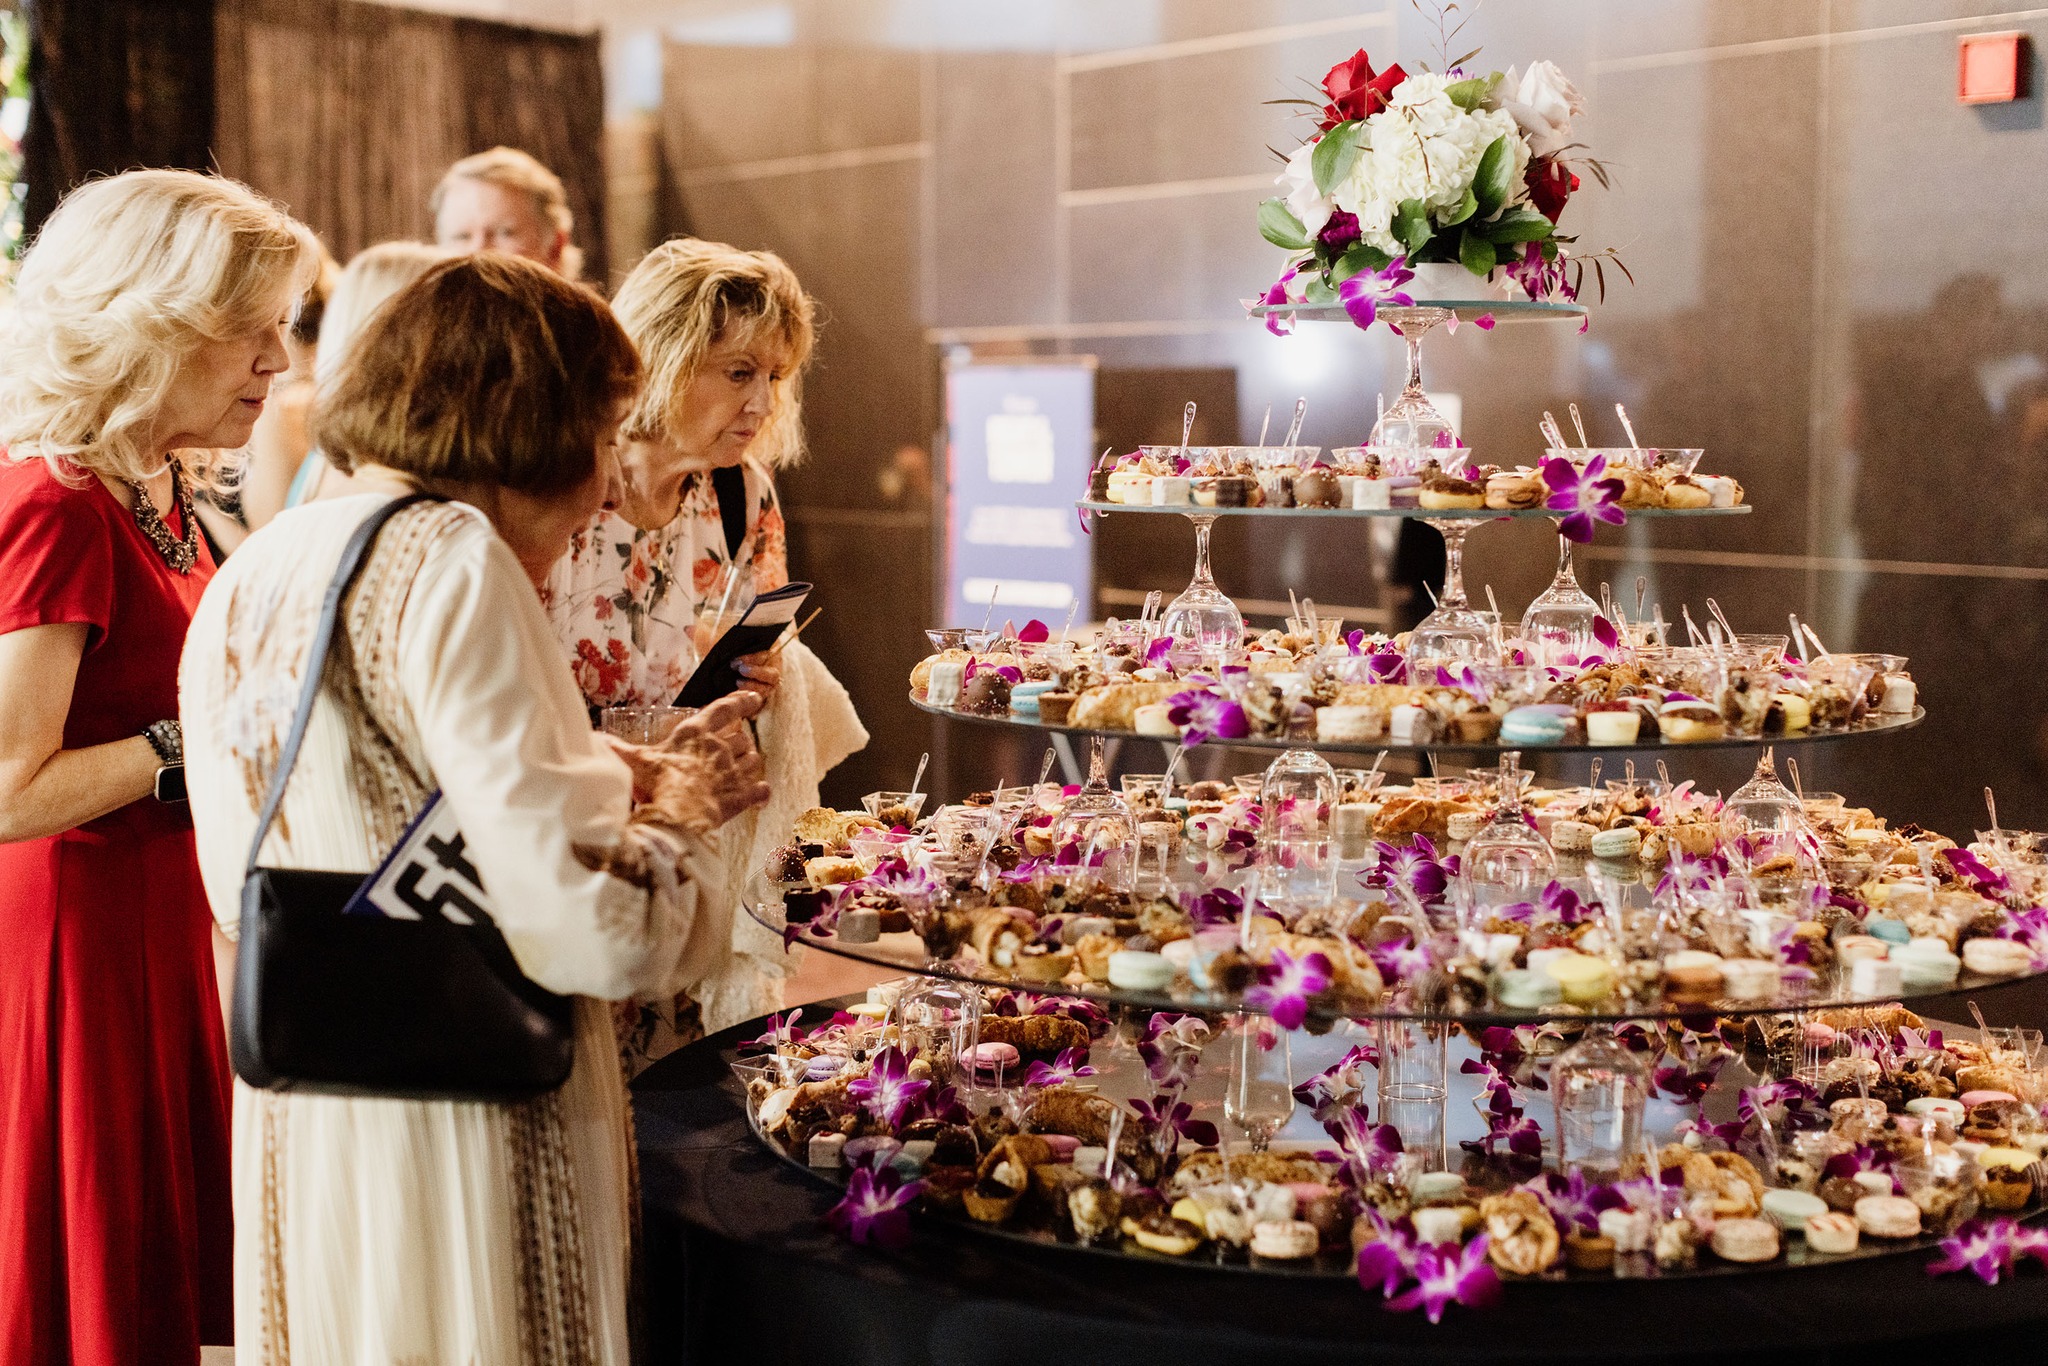 Modern photograph of several white women gathered around a tiered dessert table filled with small desserts